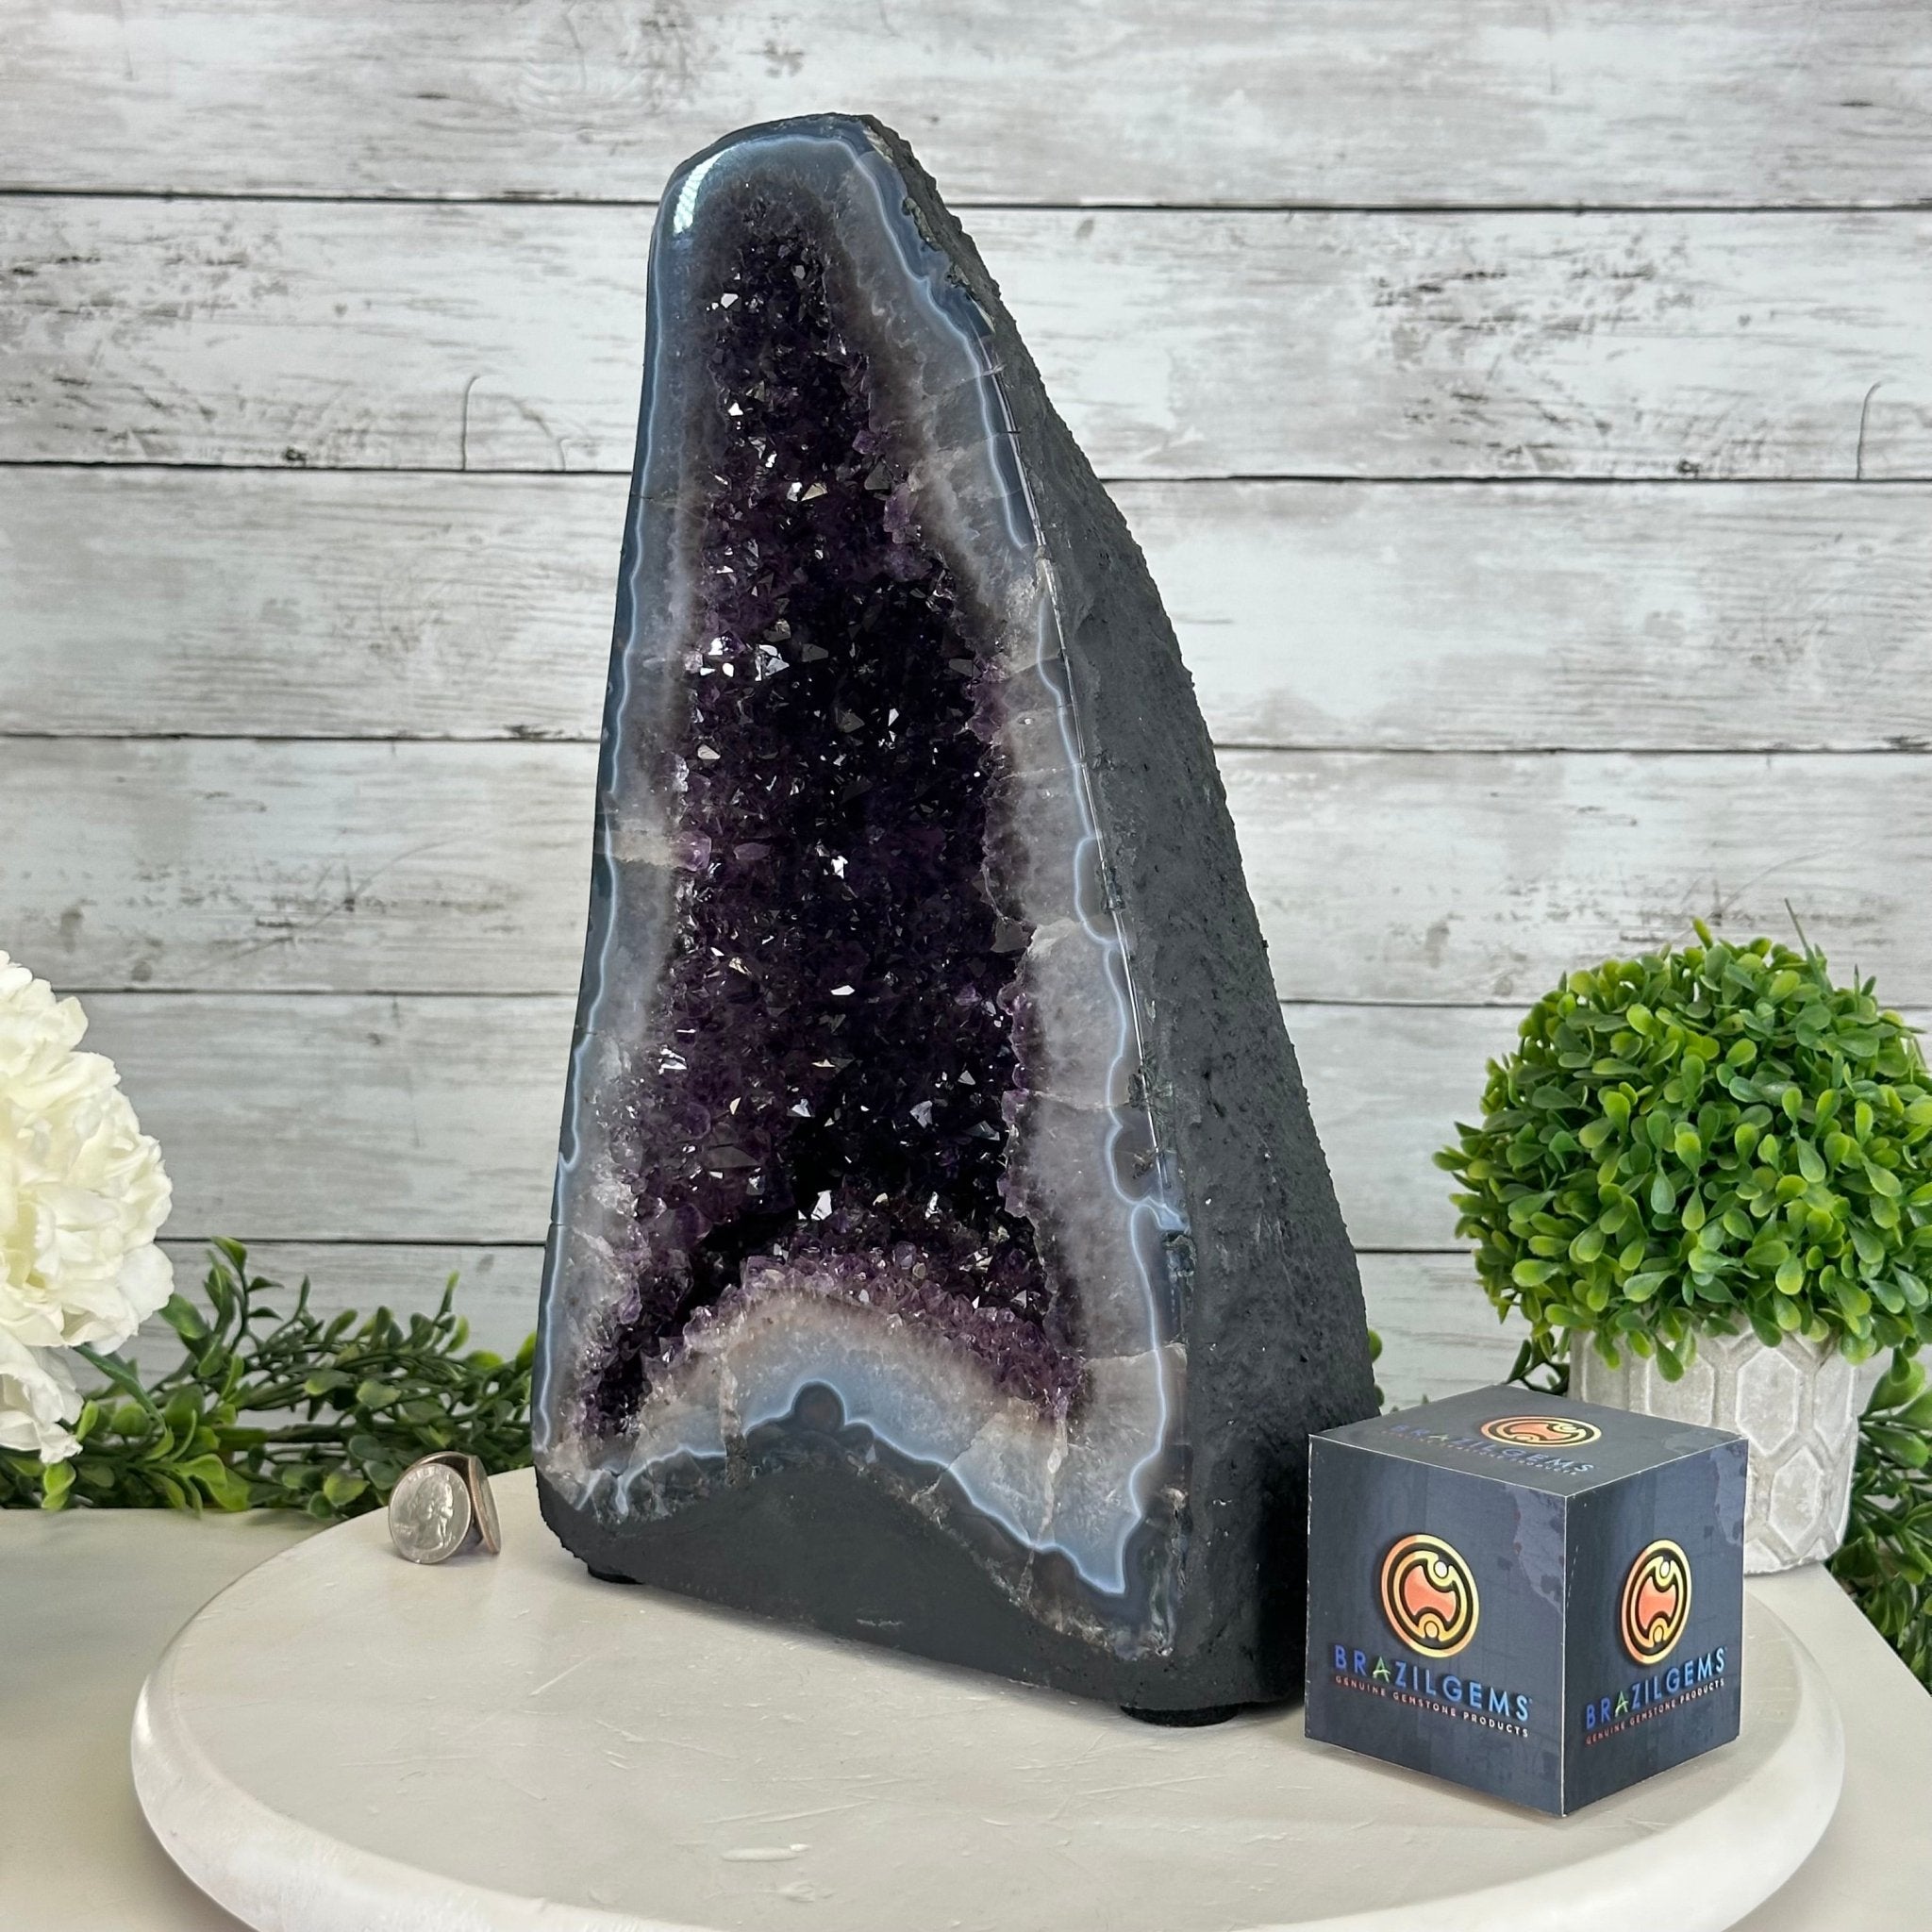 Quality Brazilian Amethyst Cathedral, 21 lbs & 13.2" Tall, #5601 - 1392 - Brazil GemsBrazil GemsQuality Brazilian Amethyst Cathedral, 21 lbs & 13.2" Tall, #5601 - 1392Cathedrals5601 - 1392